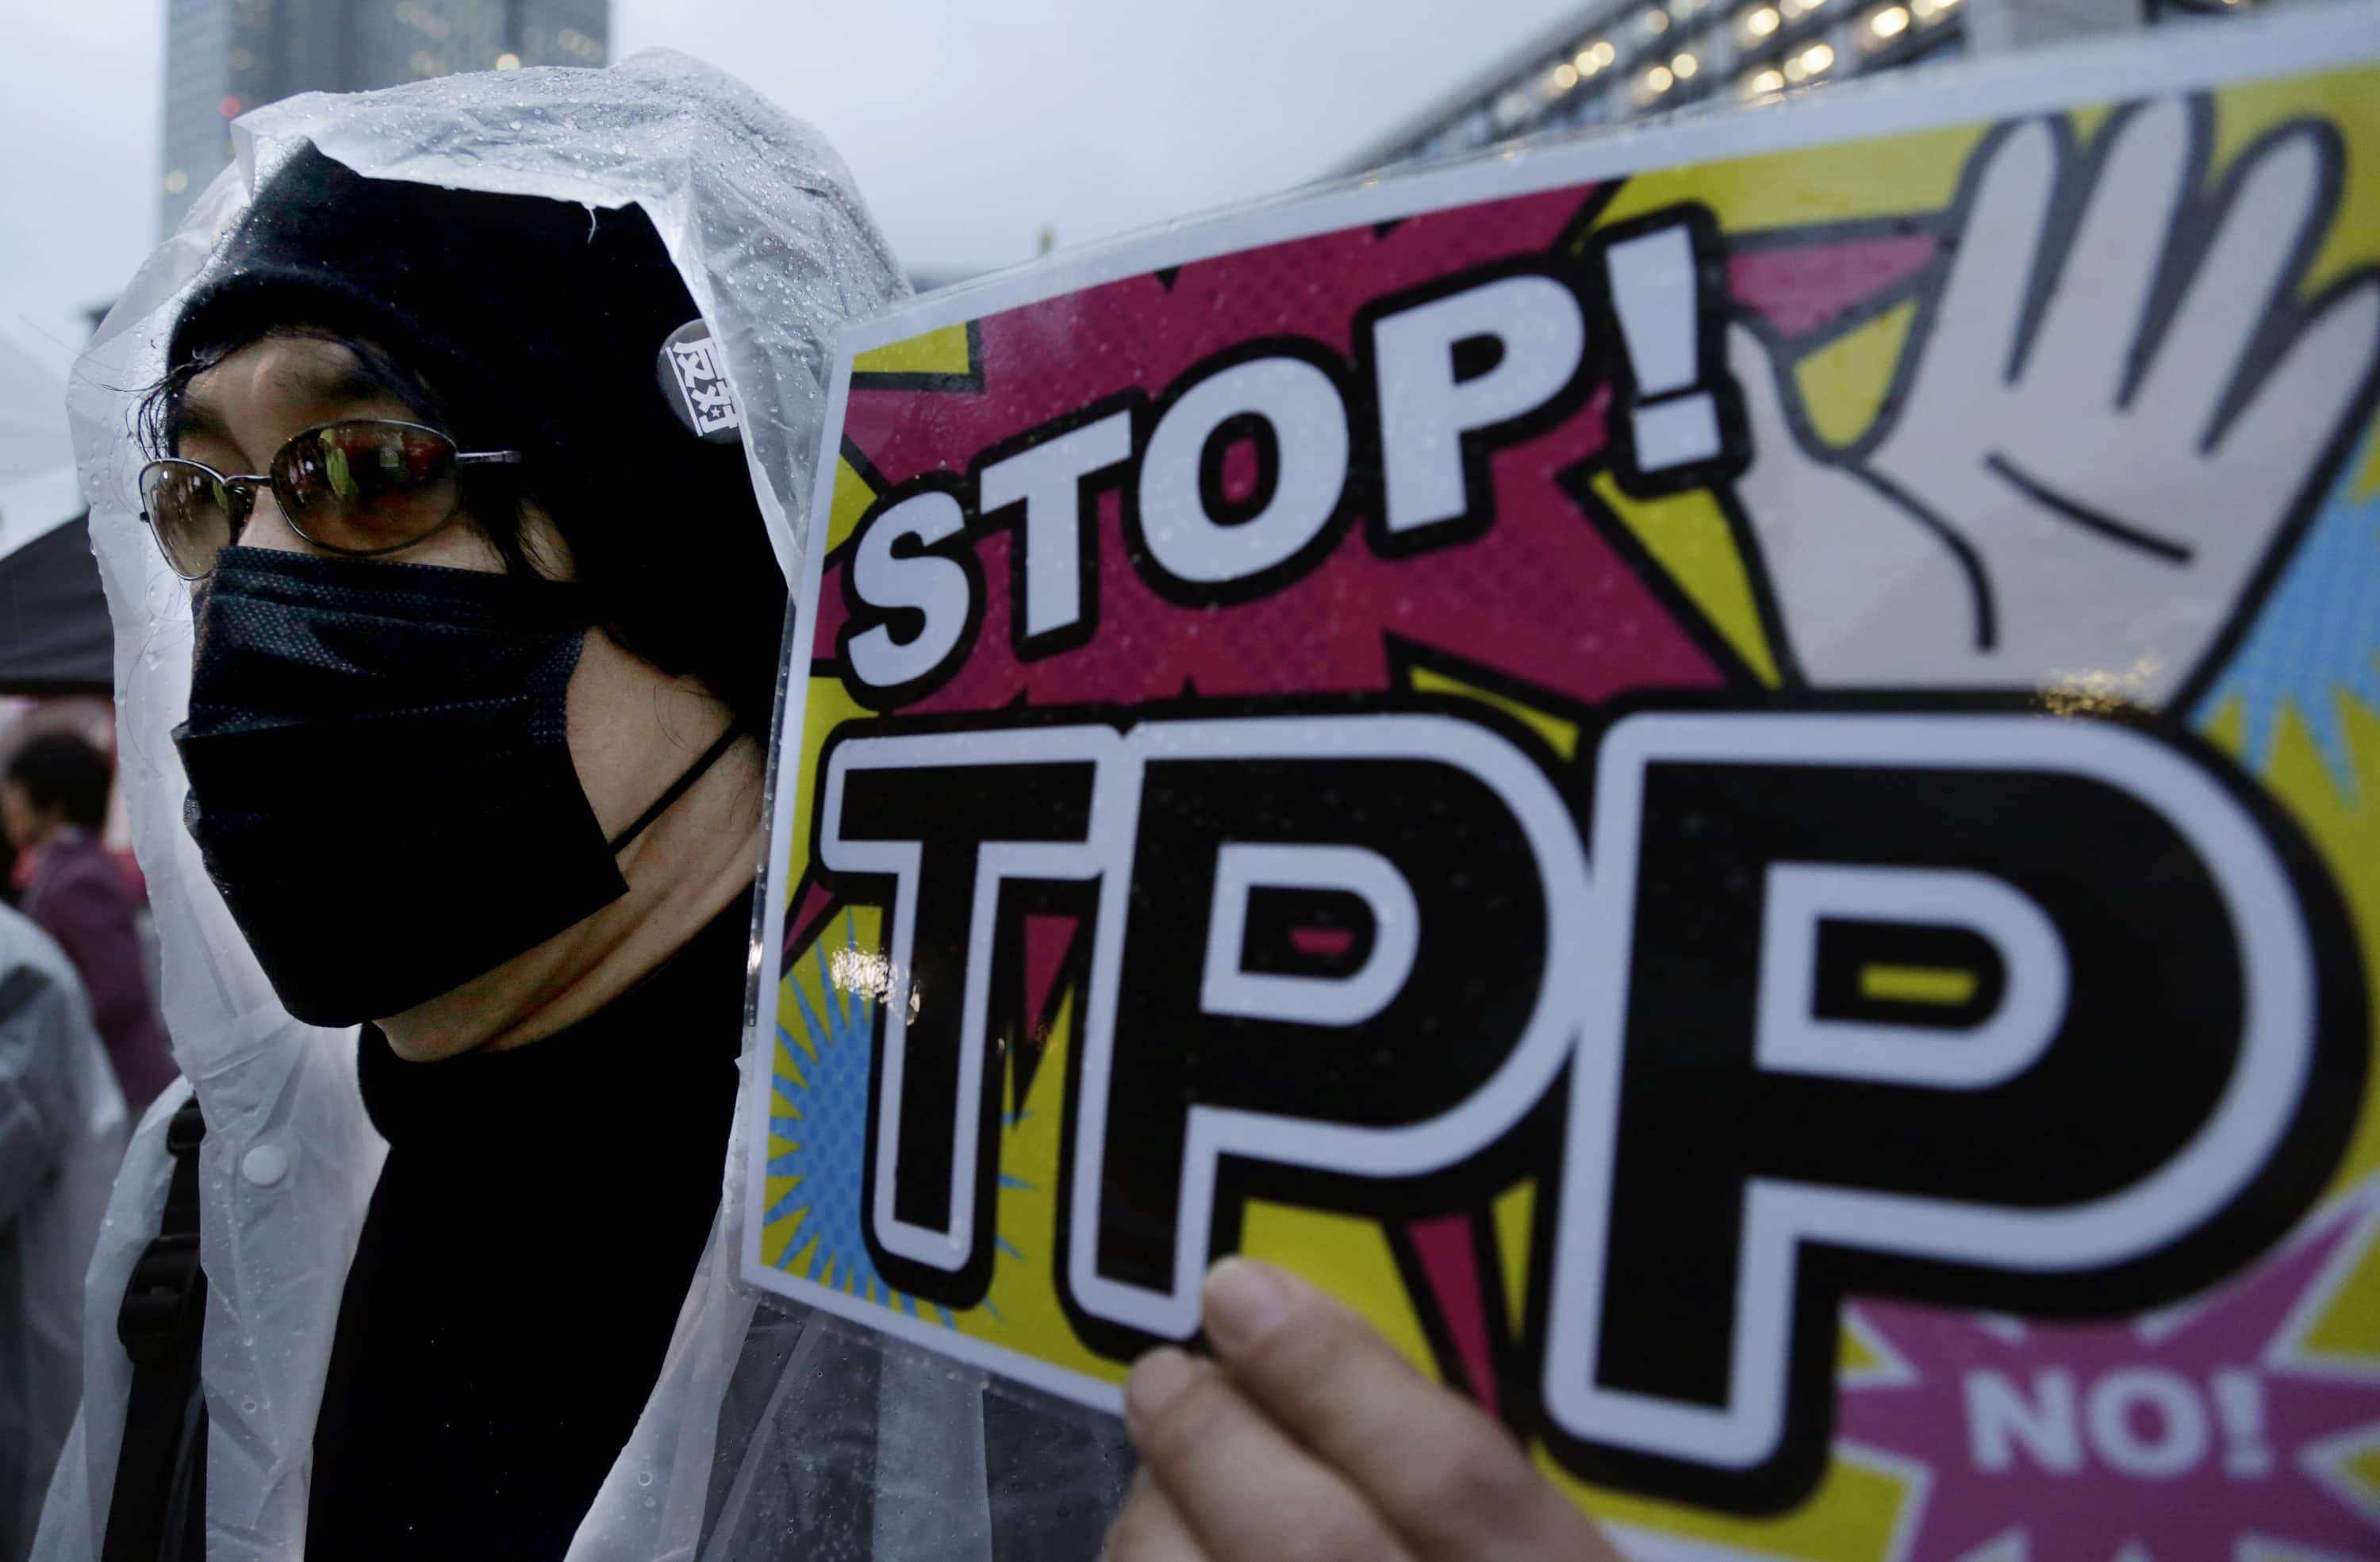 In this 22 April 2014 file photo, a protester takes part in a rally against the Trans-Pacific Partnership (TPP) in Tokyo, AP Photo/Shizuo Kambayashi, File